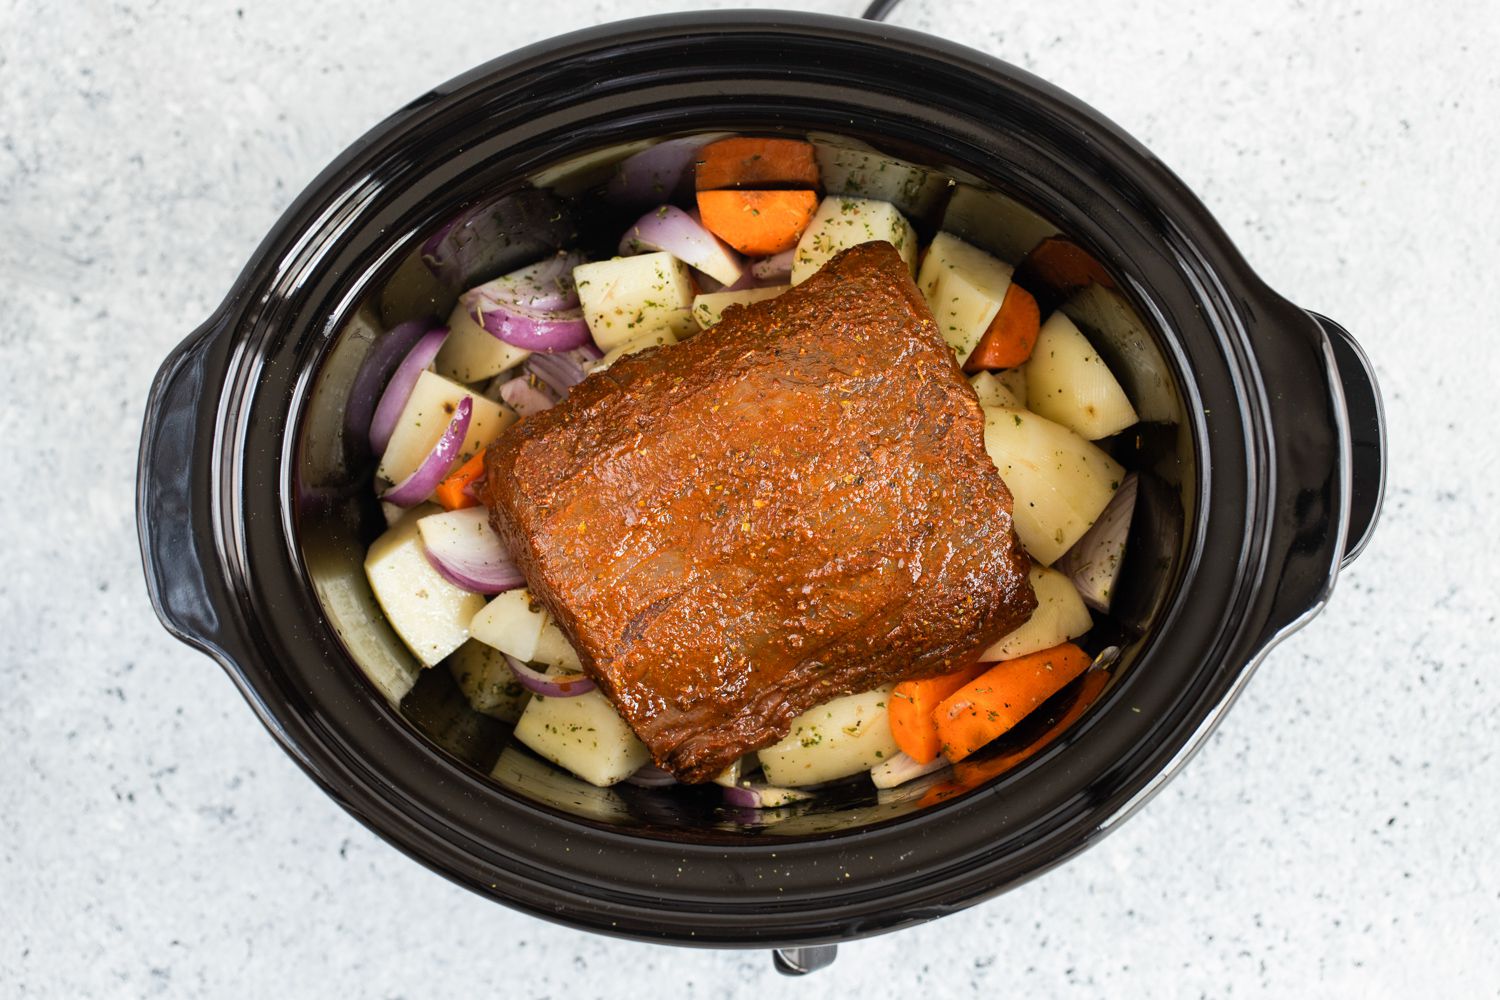 Slow Cooker Tri Tip Roast With Vegetables Recipe,Zanetti Parmigiano Reggiano Cheese